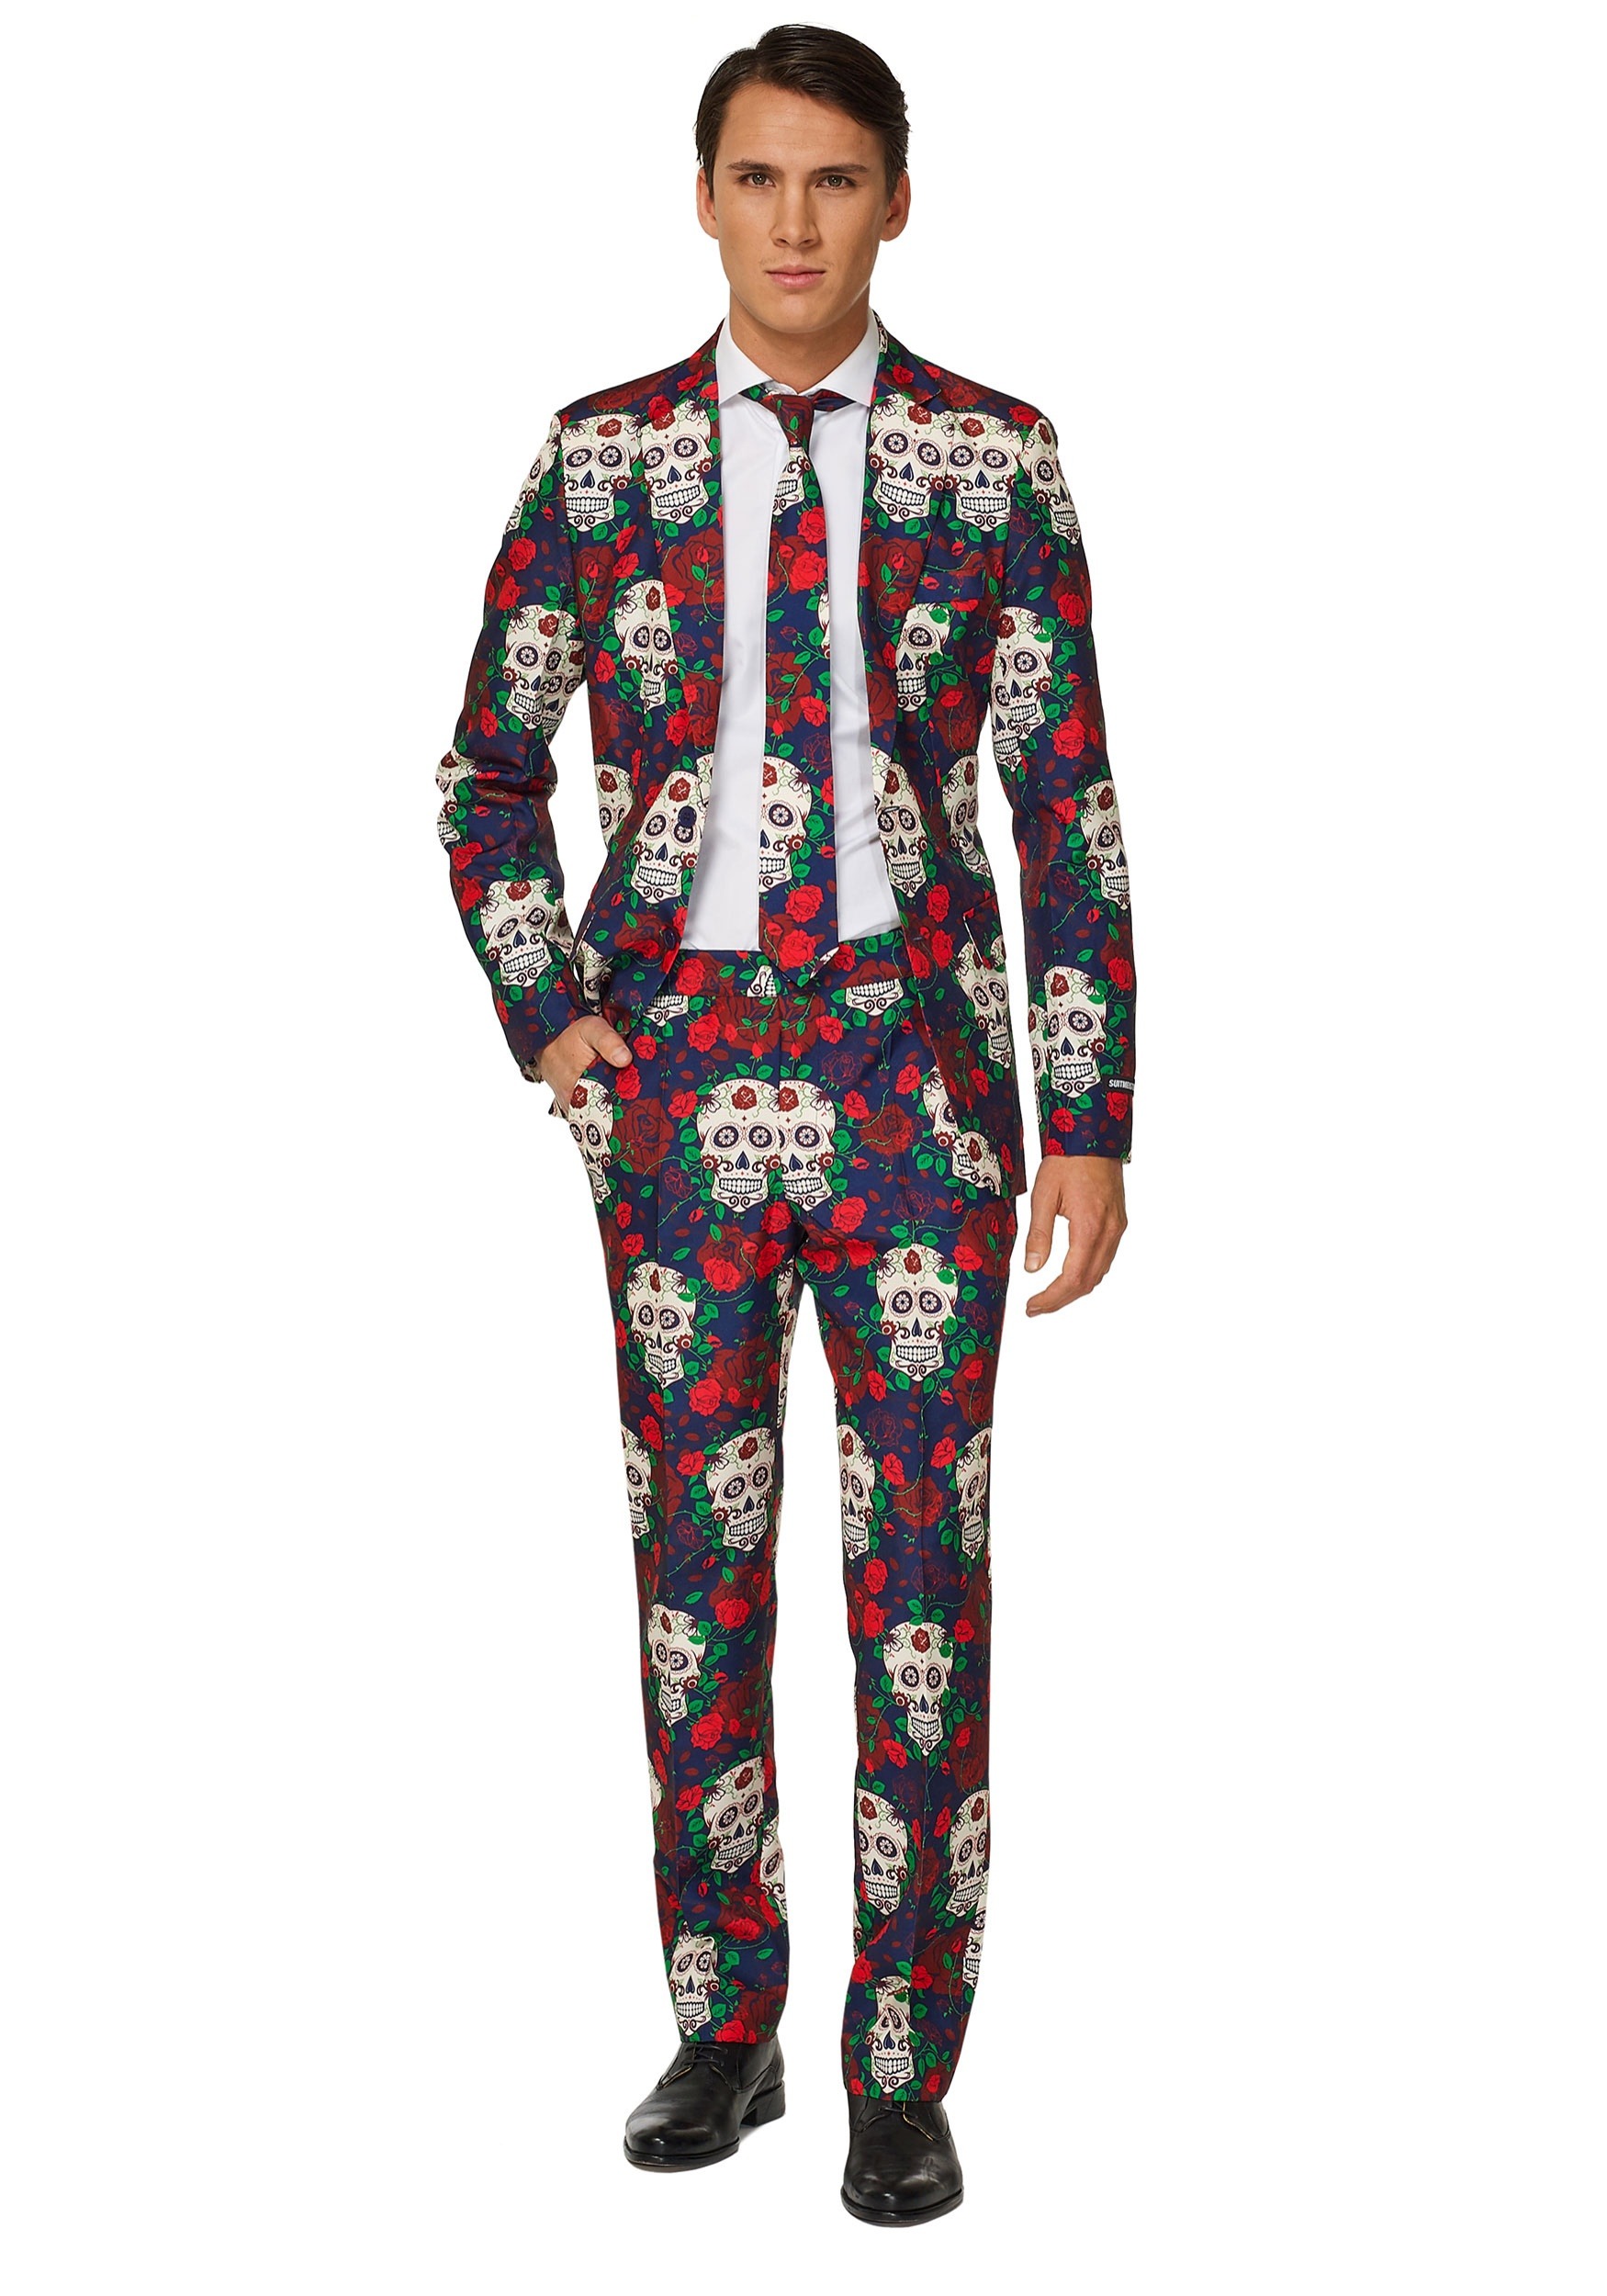 Image of Day of the Dead Men's Suitmeister Suit Costume ID OSOBAS0042-S